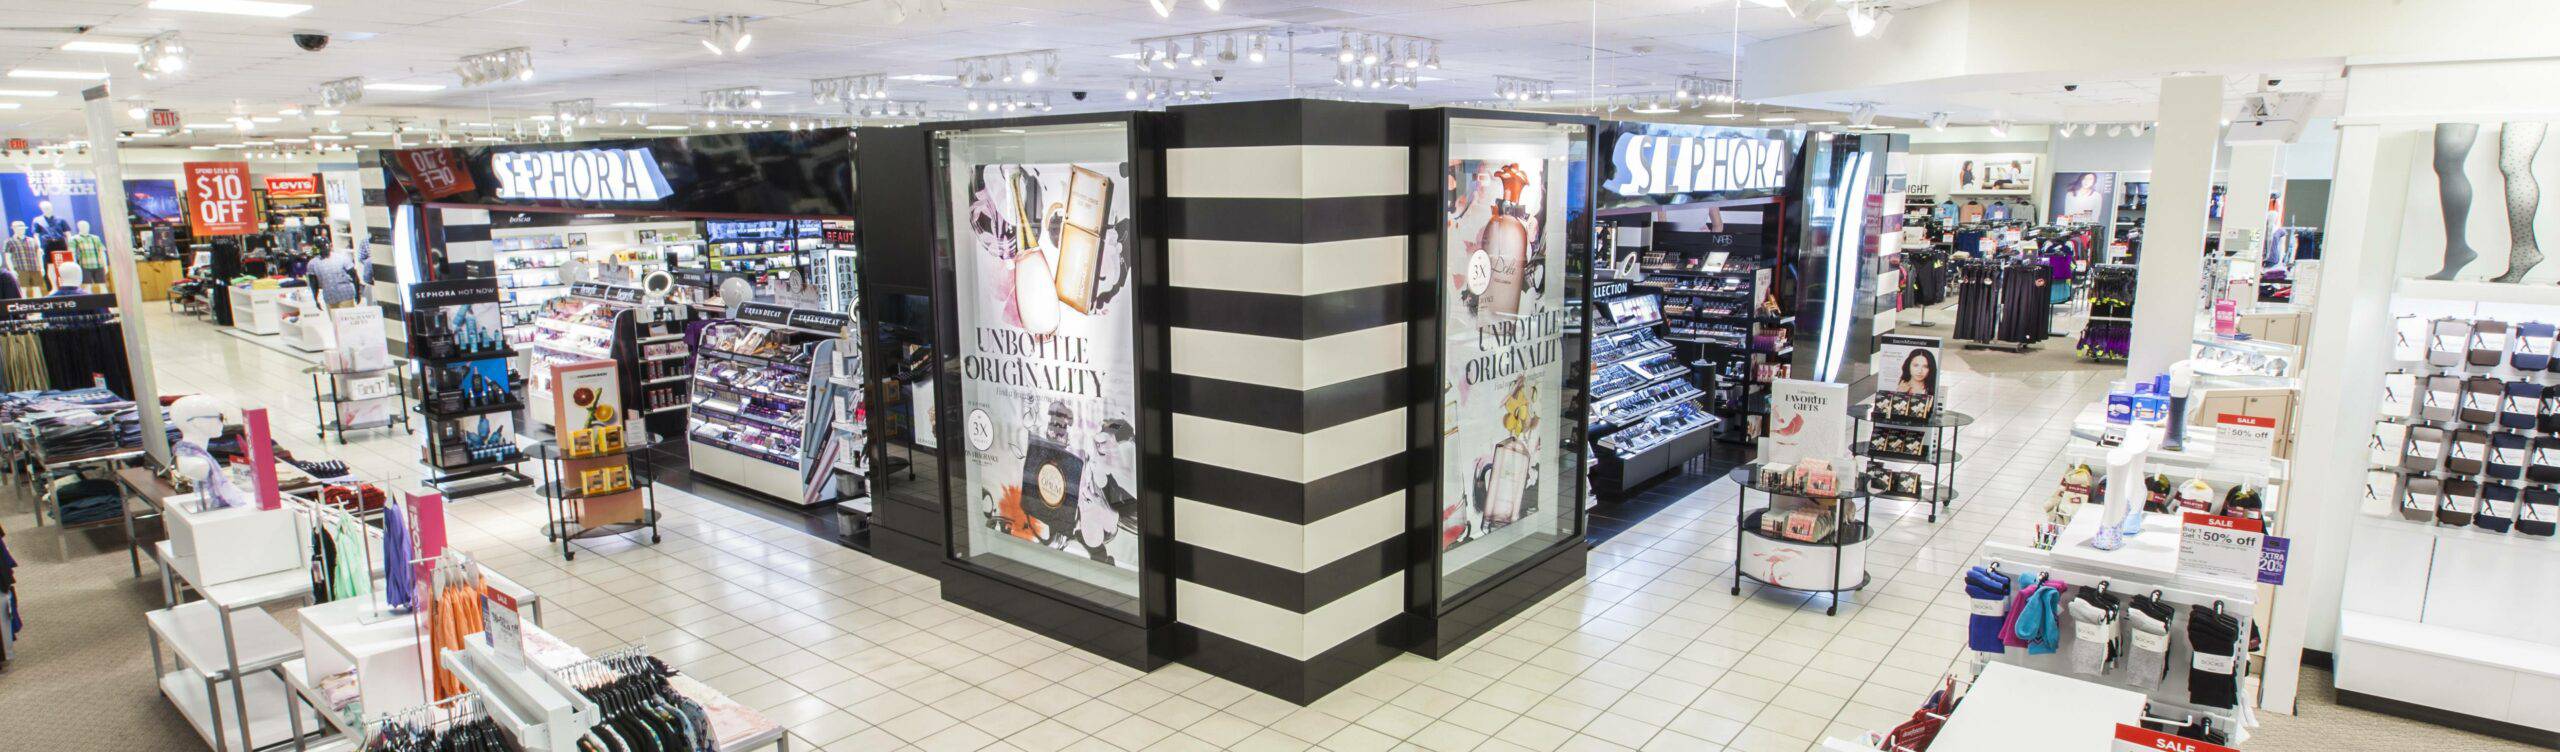 Sephora beauty store in JCPenney